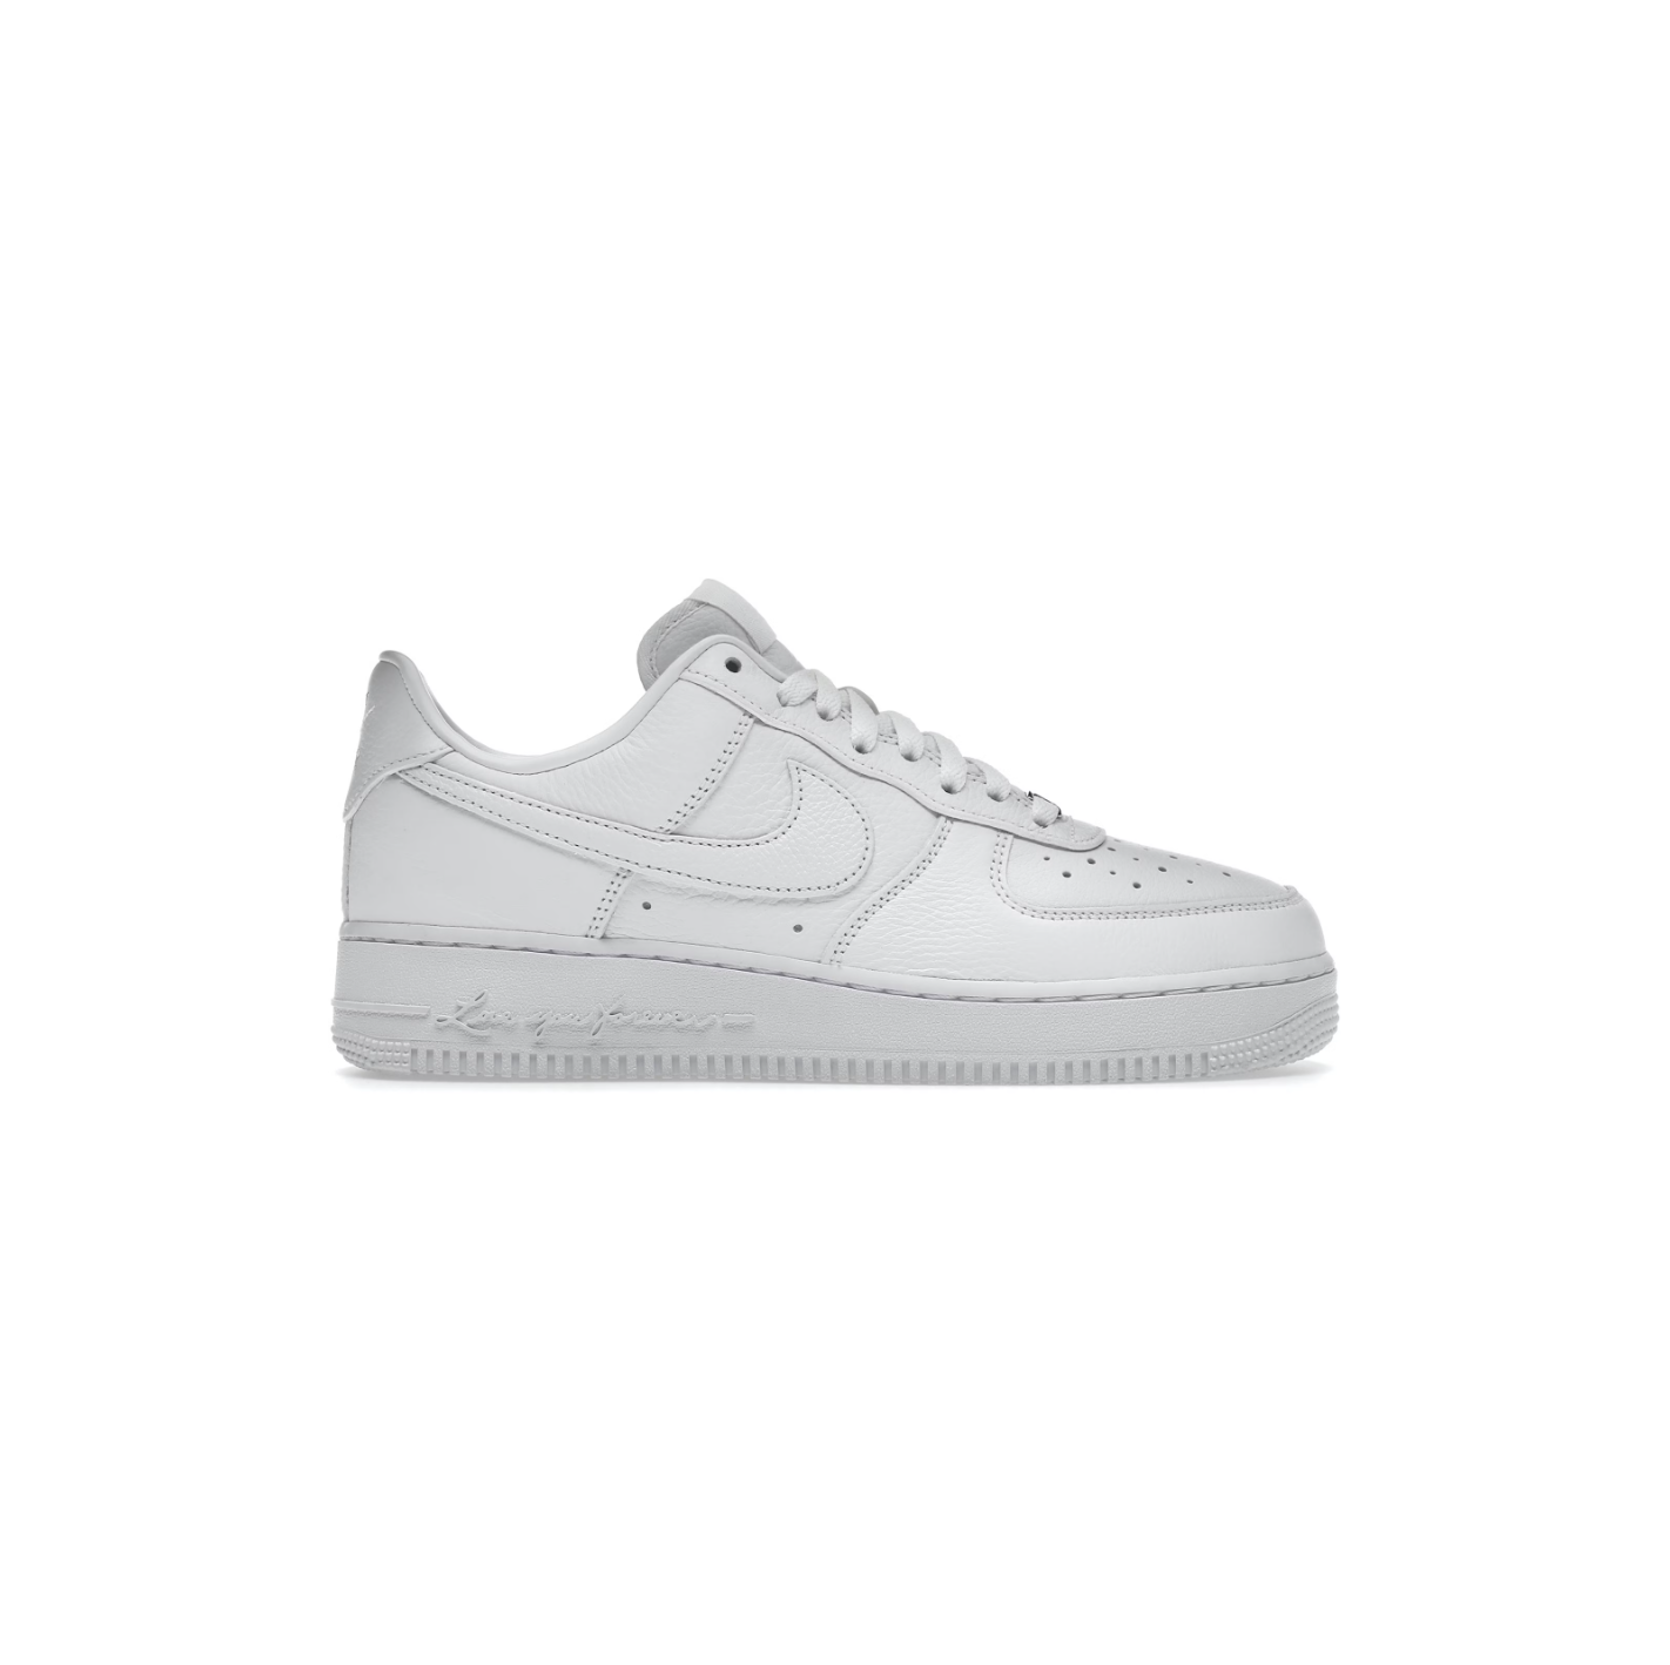 Nike Air Force 1 Low Drake NOCTA Certified Lover Boy - Silhouette ...